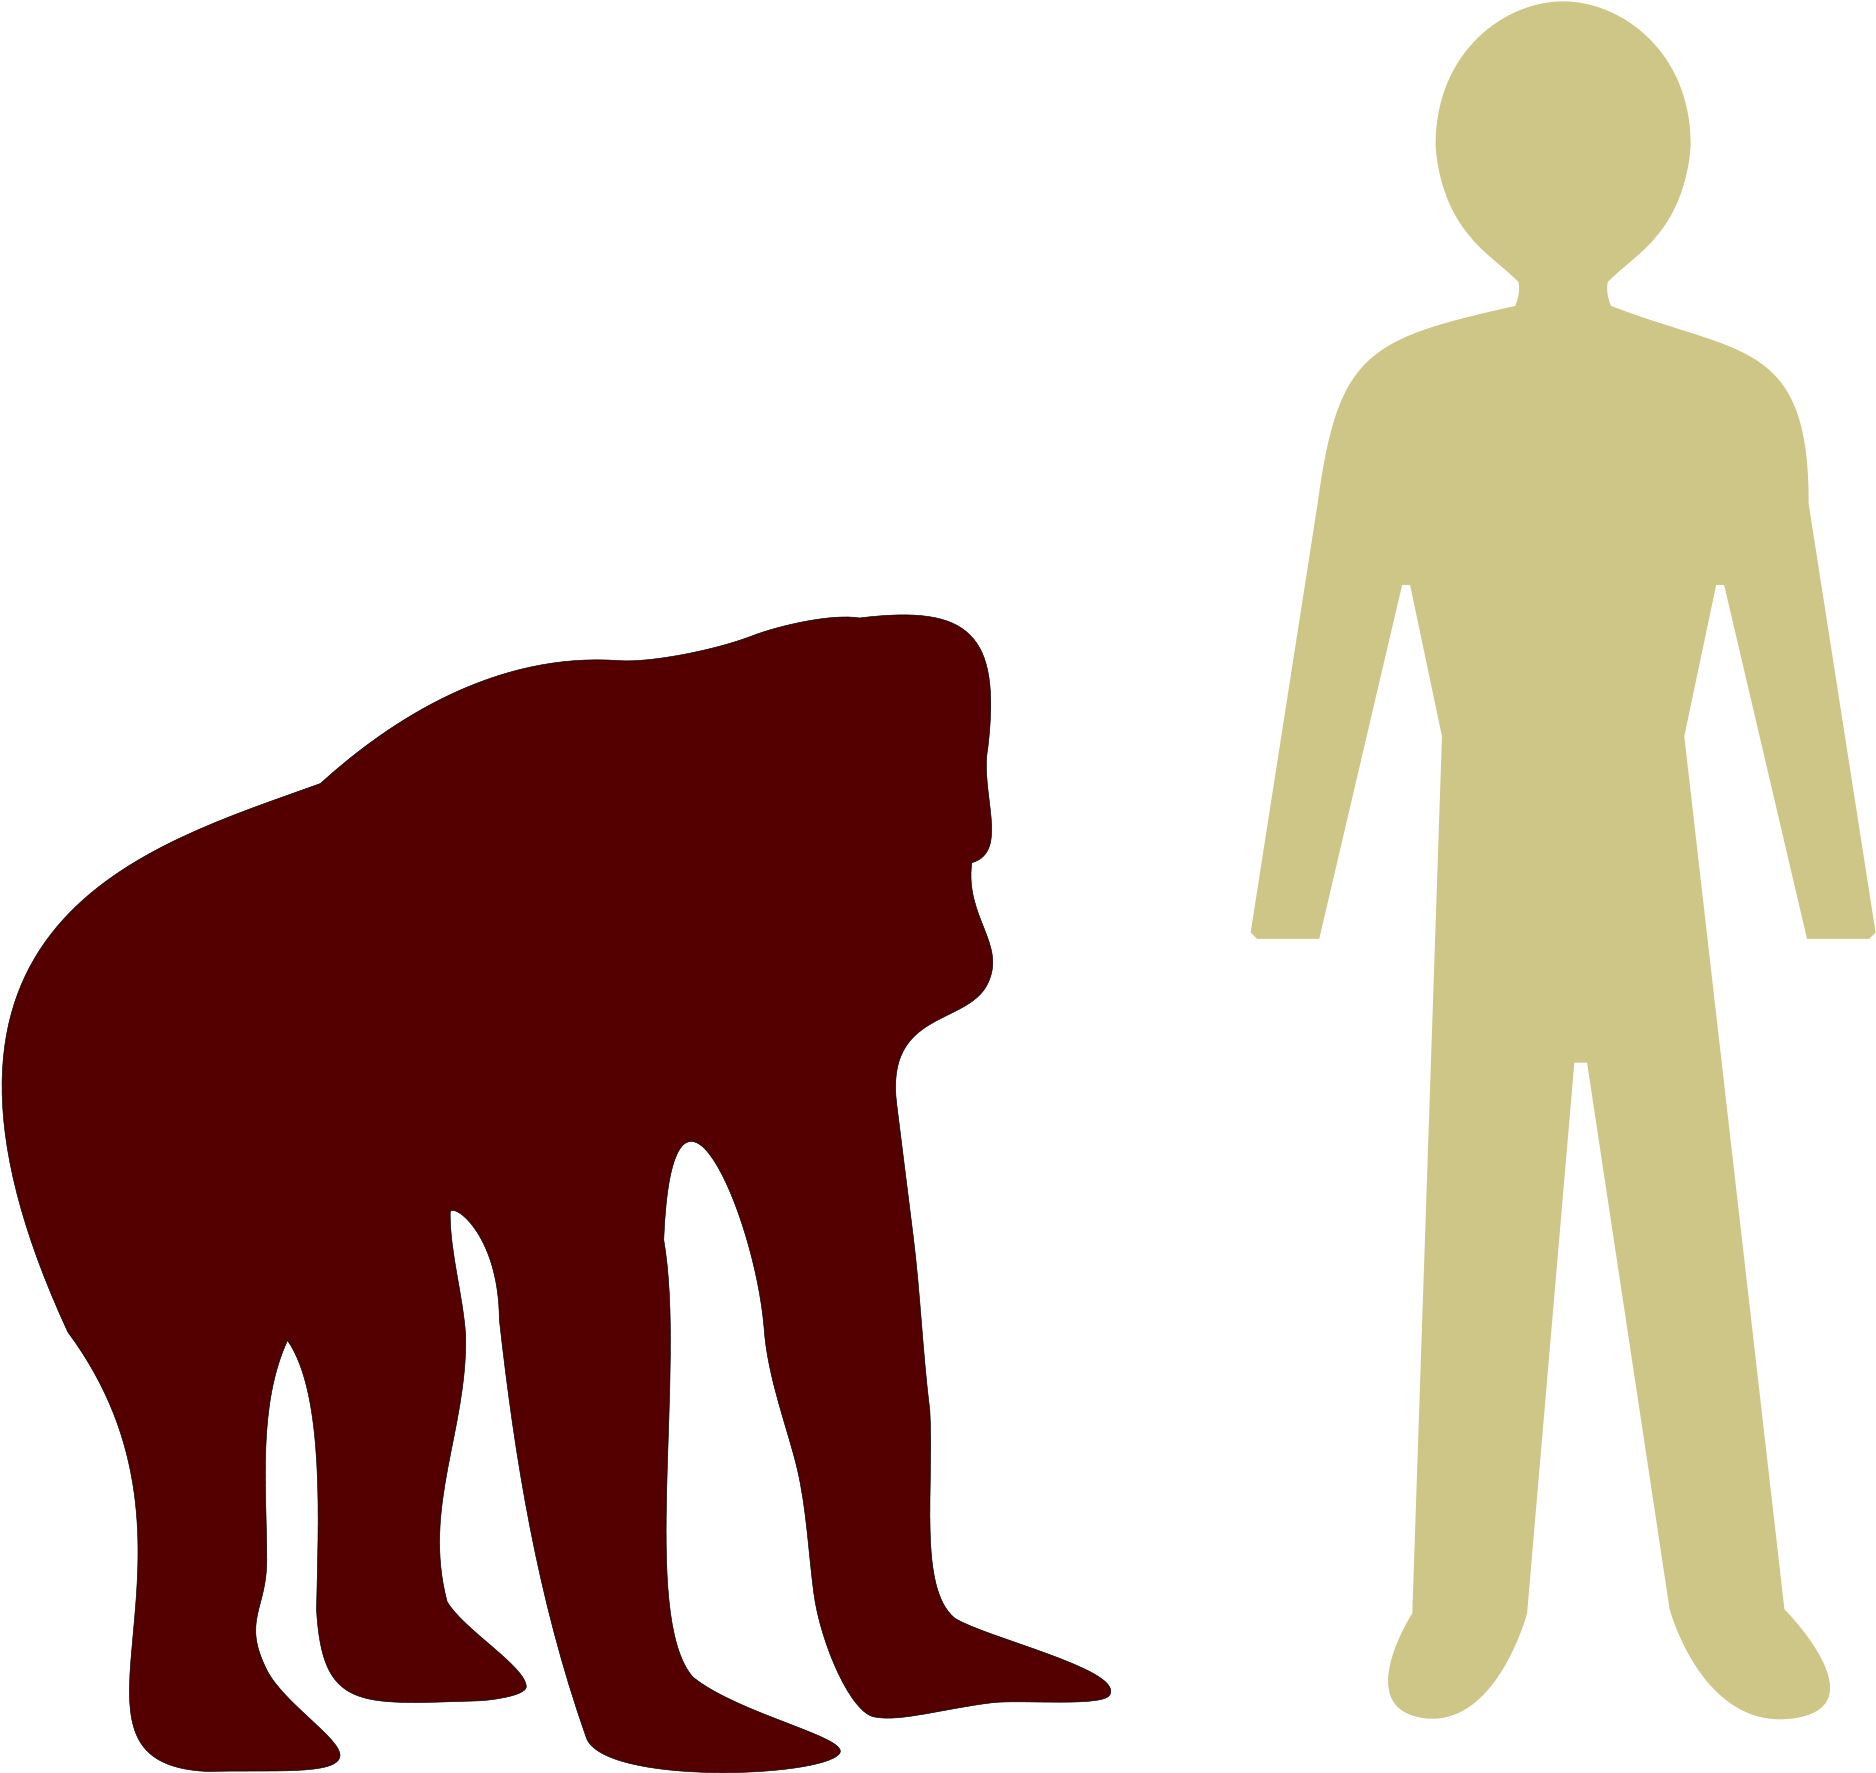 A Man And Monkey Silhouettes